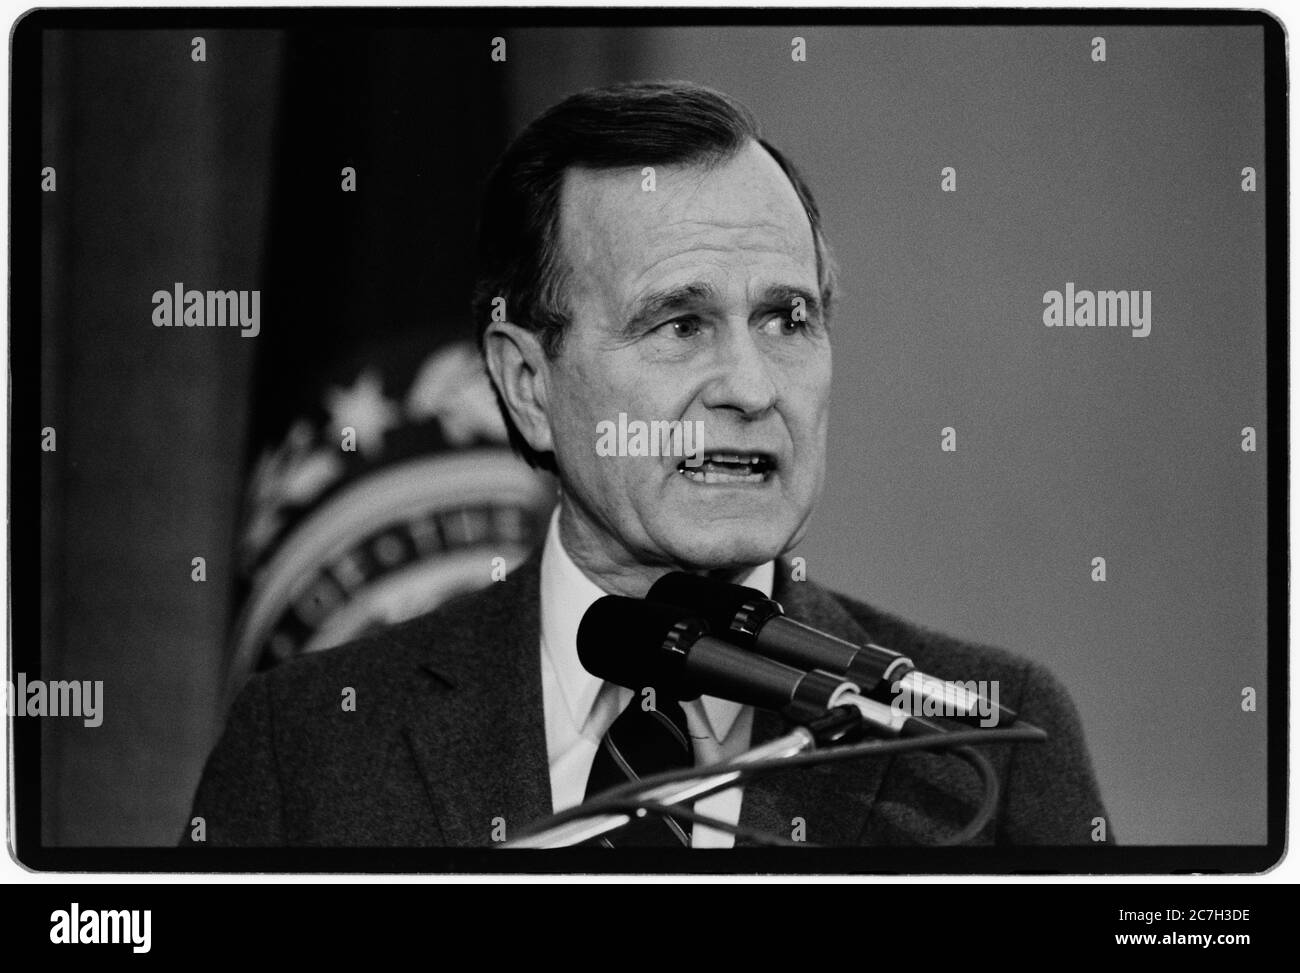 US Presidential Election Campaign 1988 George  H W Bush on the campaign trail during the New Hampshire Primaries in February 1988 George Herbert Walker Bush (June 12, 1924 – November 30, 2018) was an American politician, diplomat, and businessman who served as the 41st president of the United States from 1989 to 1993. A member of the Republican Party, Bush also served in the U.S. House of Representatives, as U.S. Ambassador to the United Nations, as Director of Central Intelligence, and as the 43rd vice president. Stock Photo